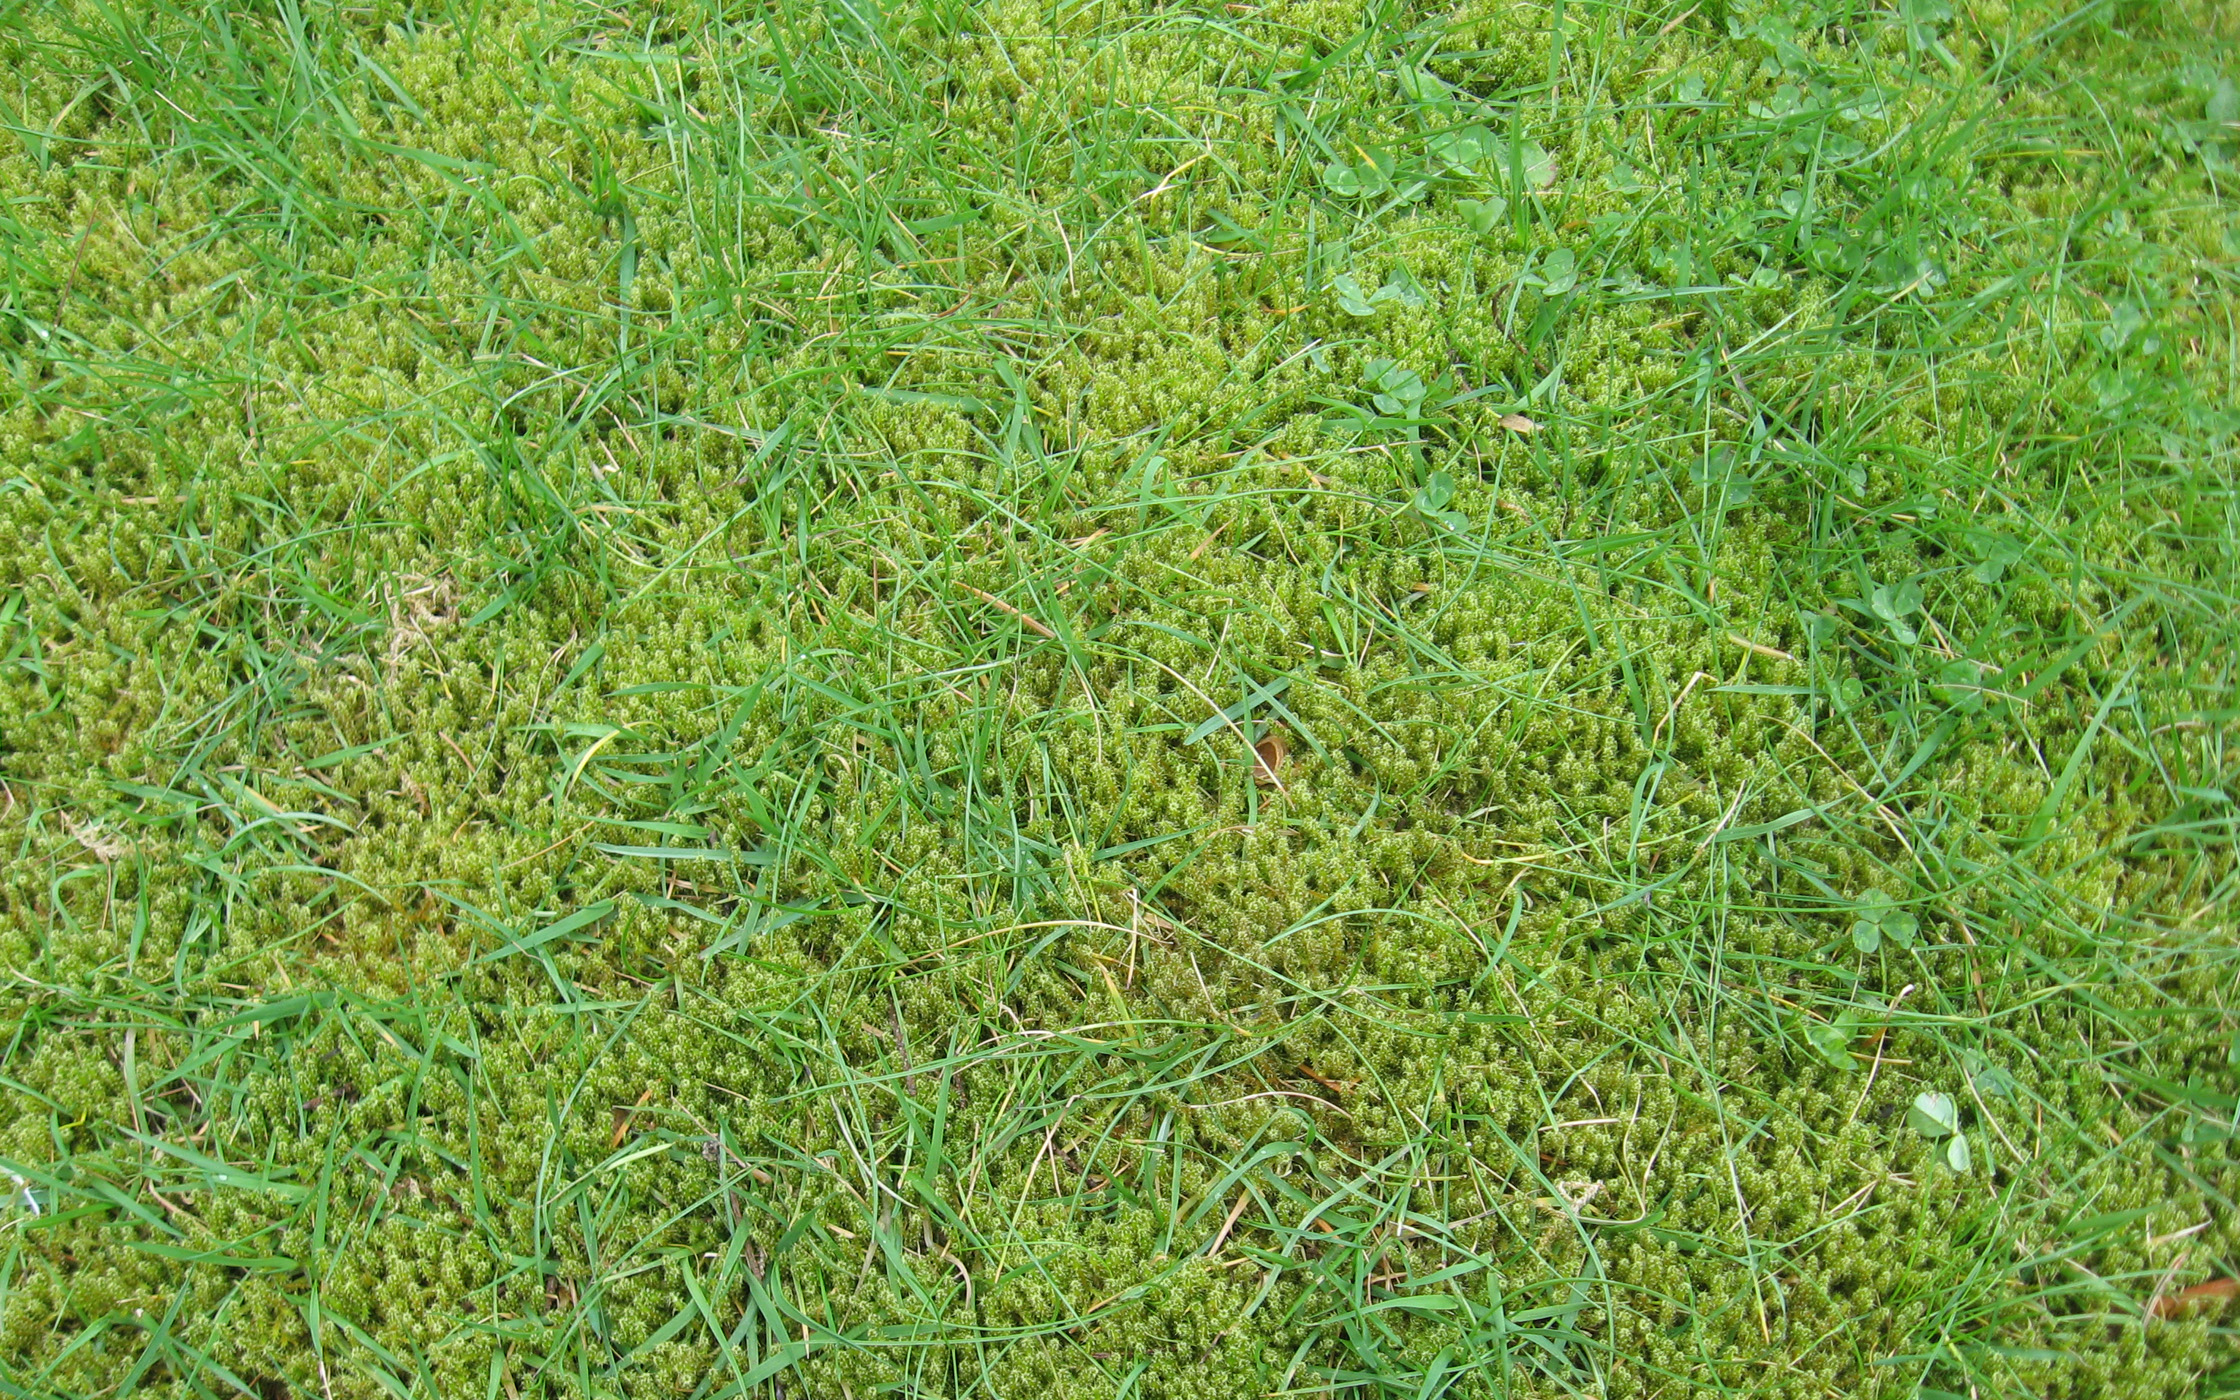 Correcting Lawn Conditions That Favour Moss Growth